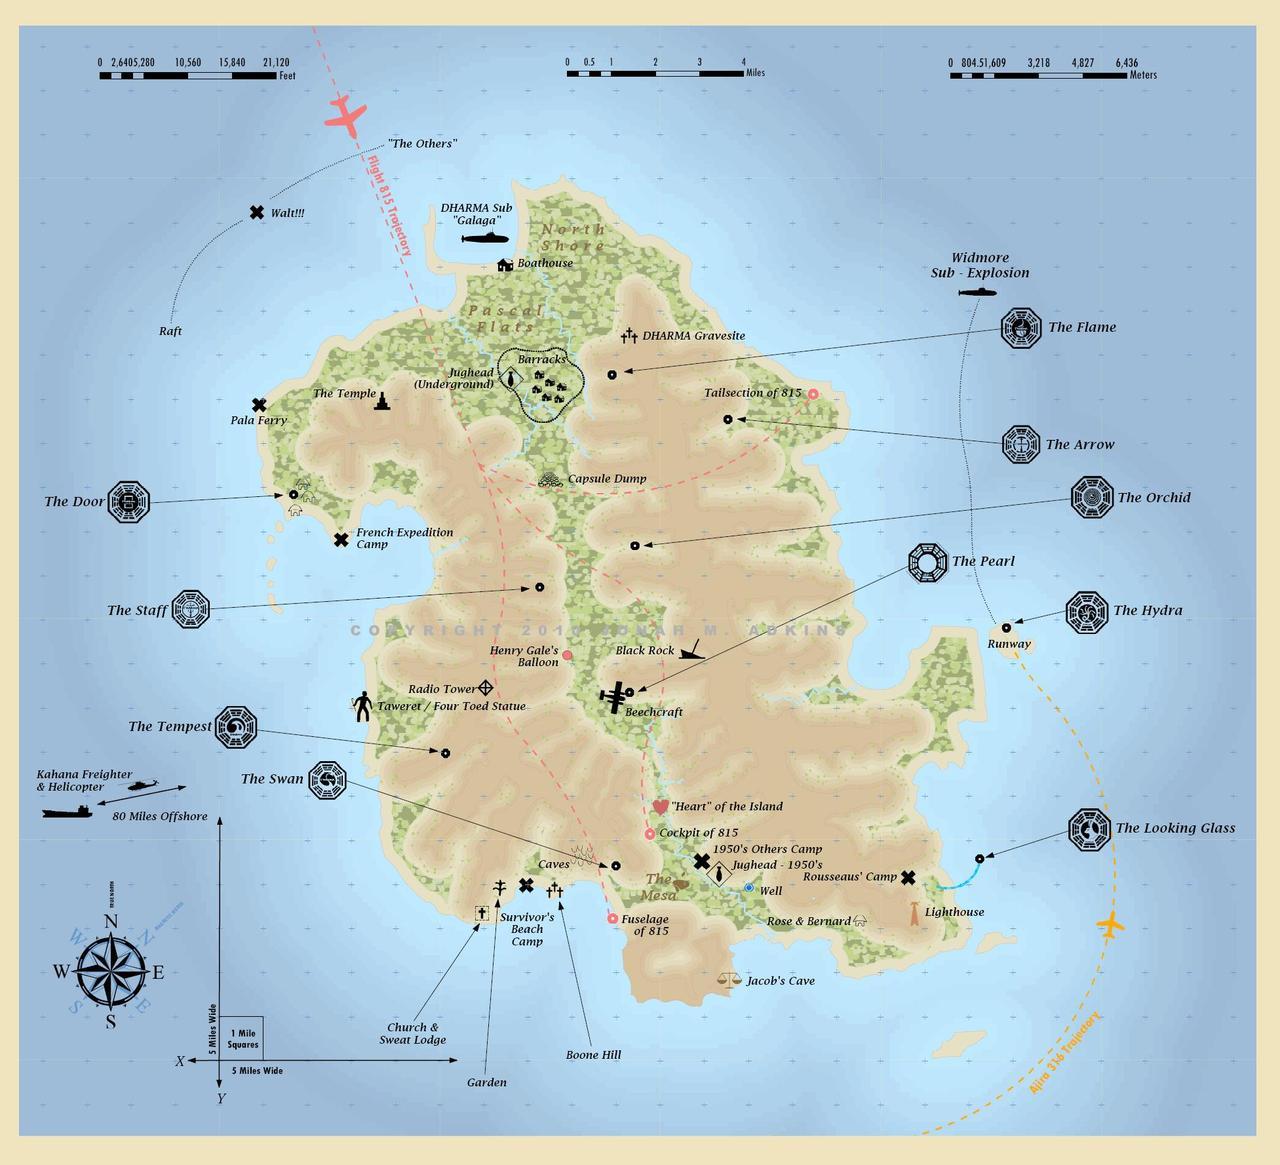 geographyoflost:
“ High Res of the island map
”